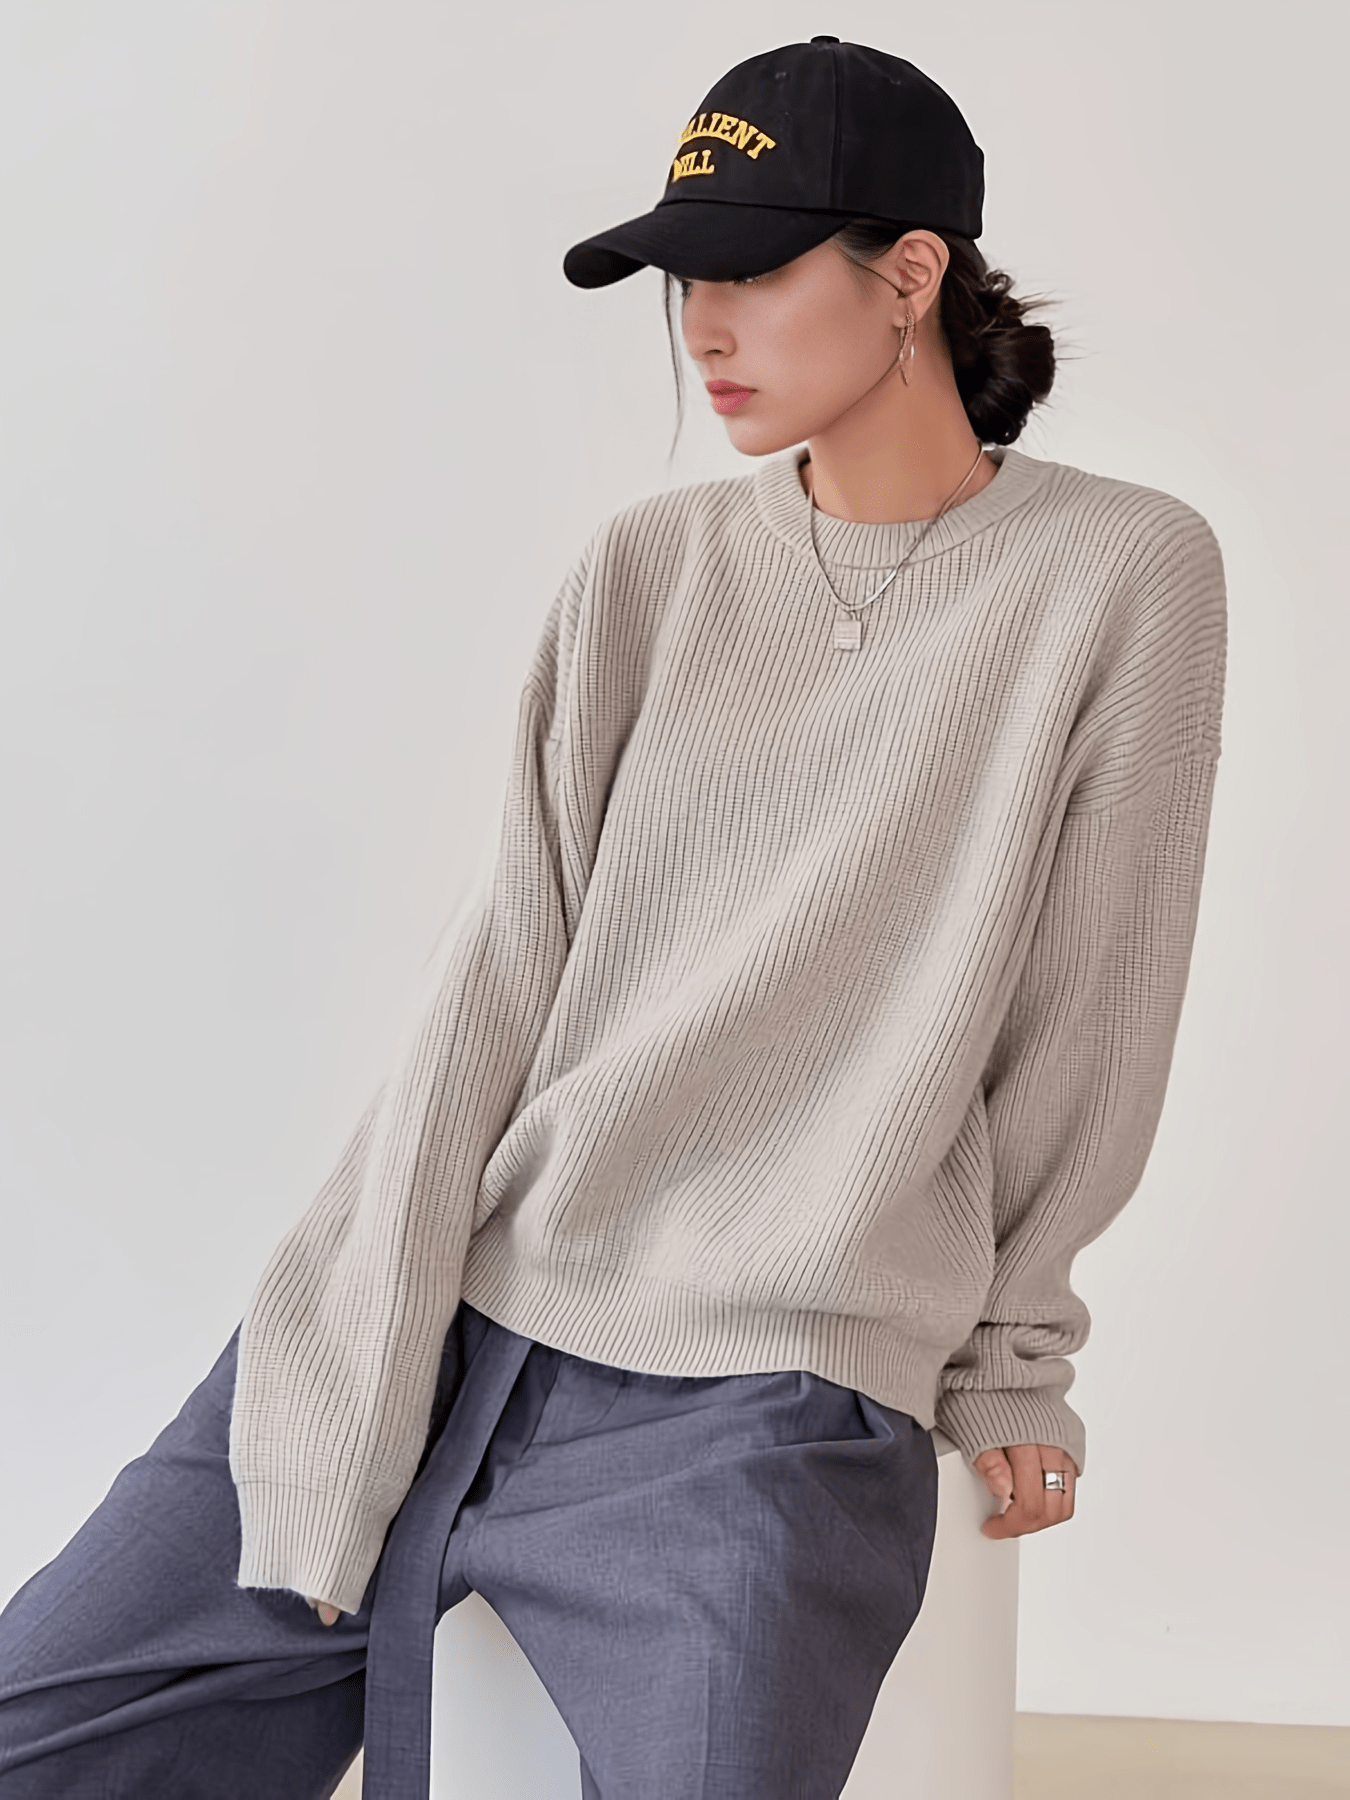 vlovelaw  Solid Ribbed Sweater, Casual Crew Neck Long Sleeve Sweater, Casual Tops For Fall & Winter, Women's Clothing